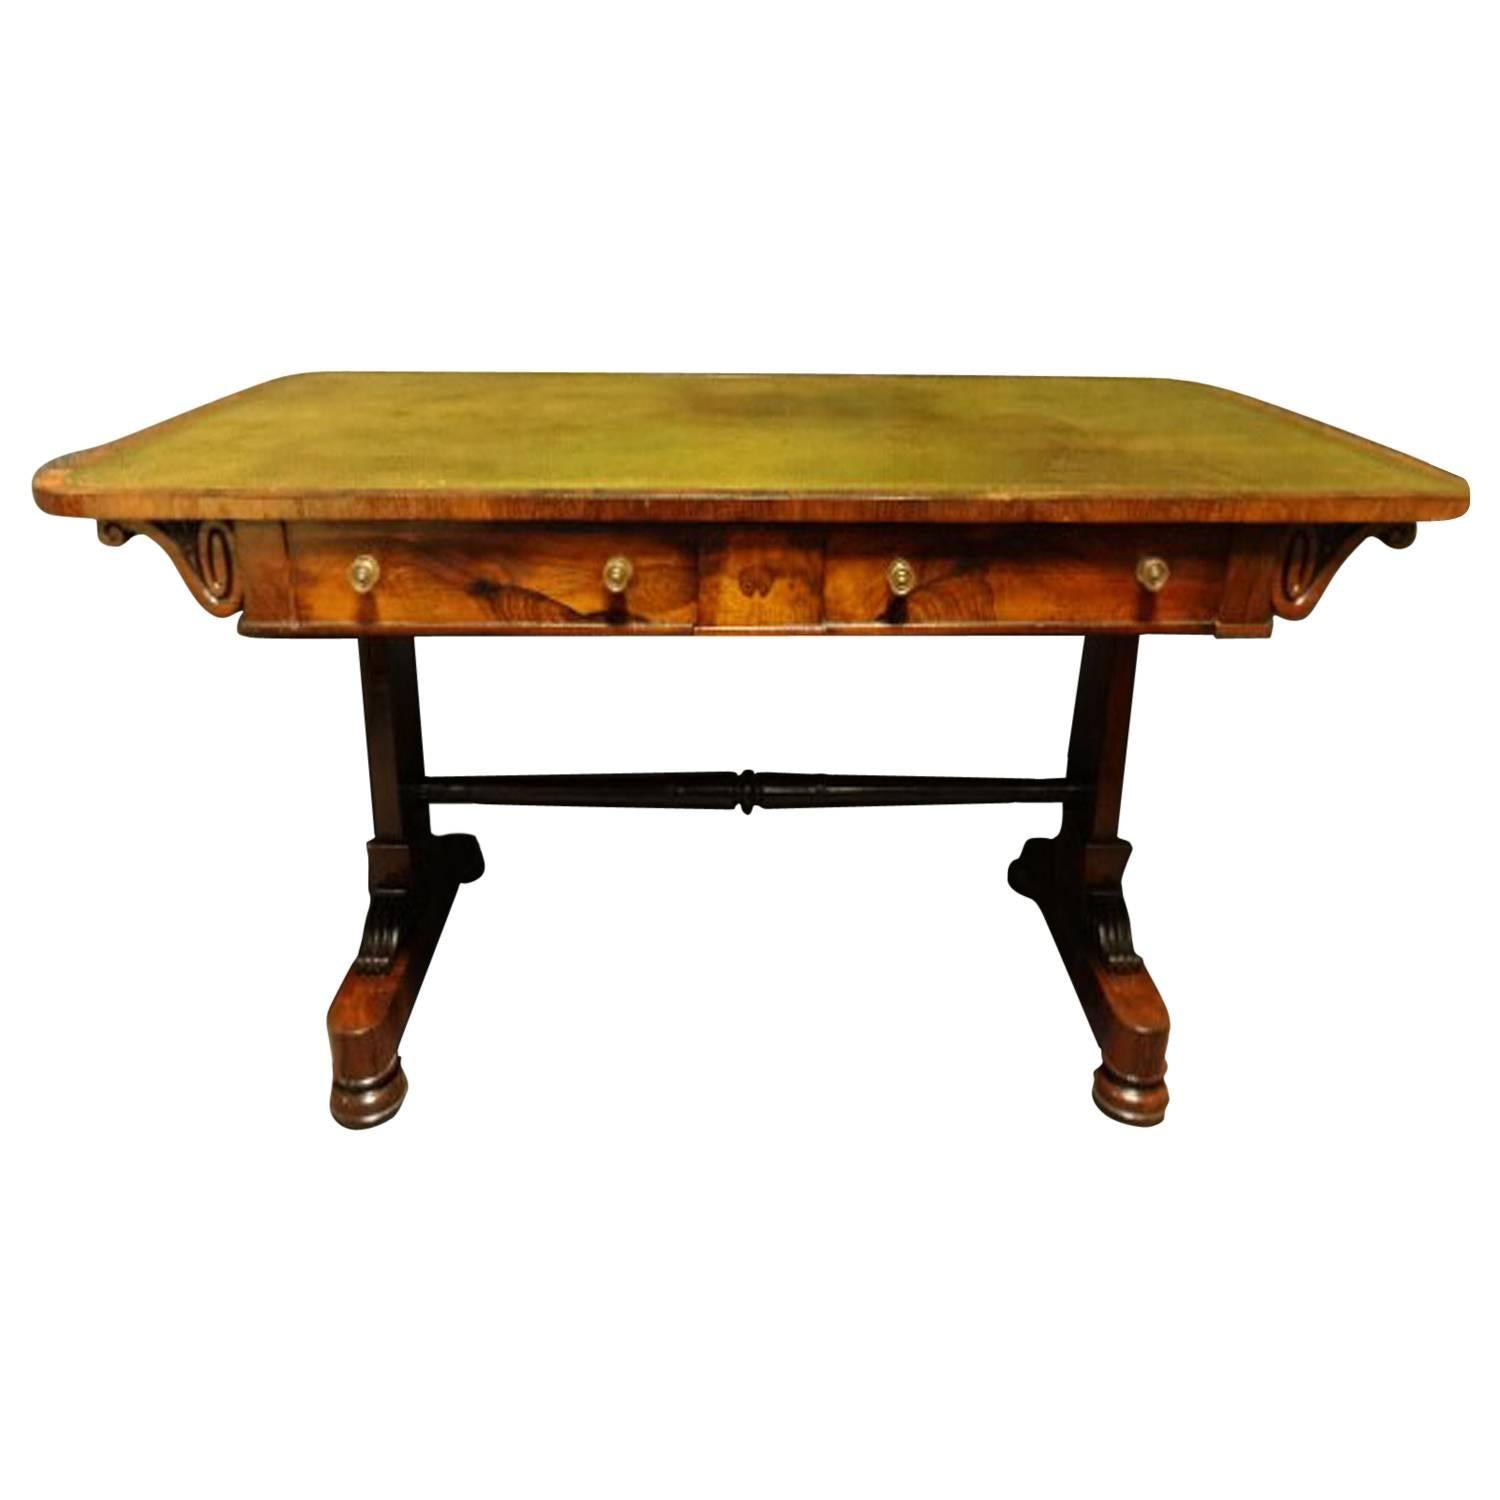 Excellent Quality Regency Rosewood Library Table